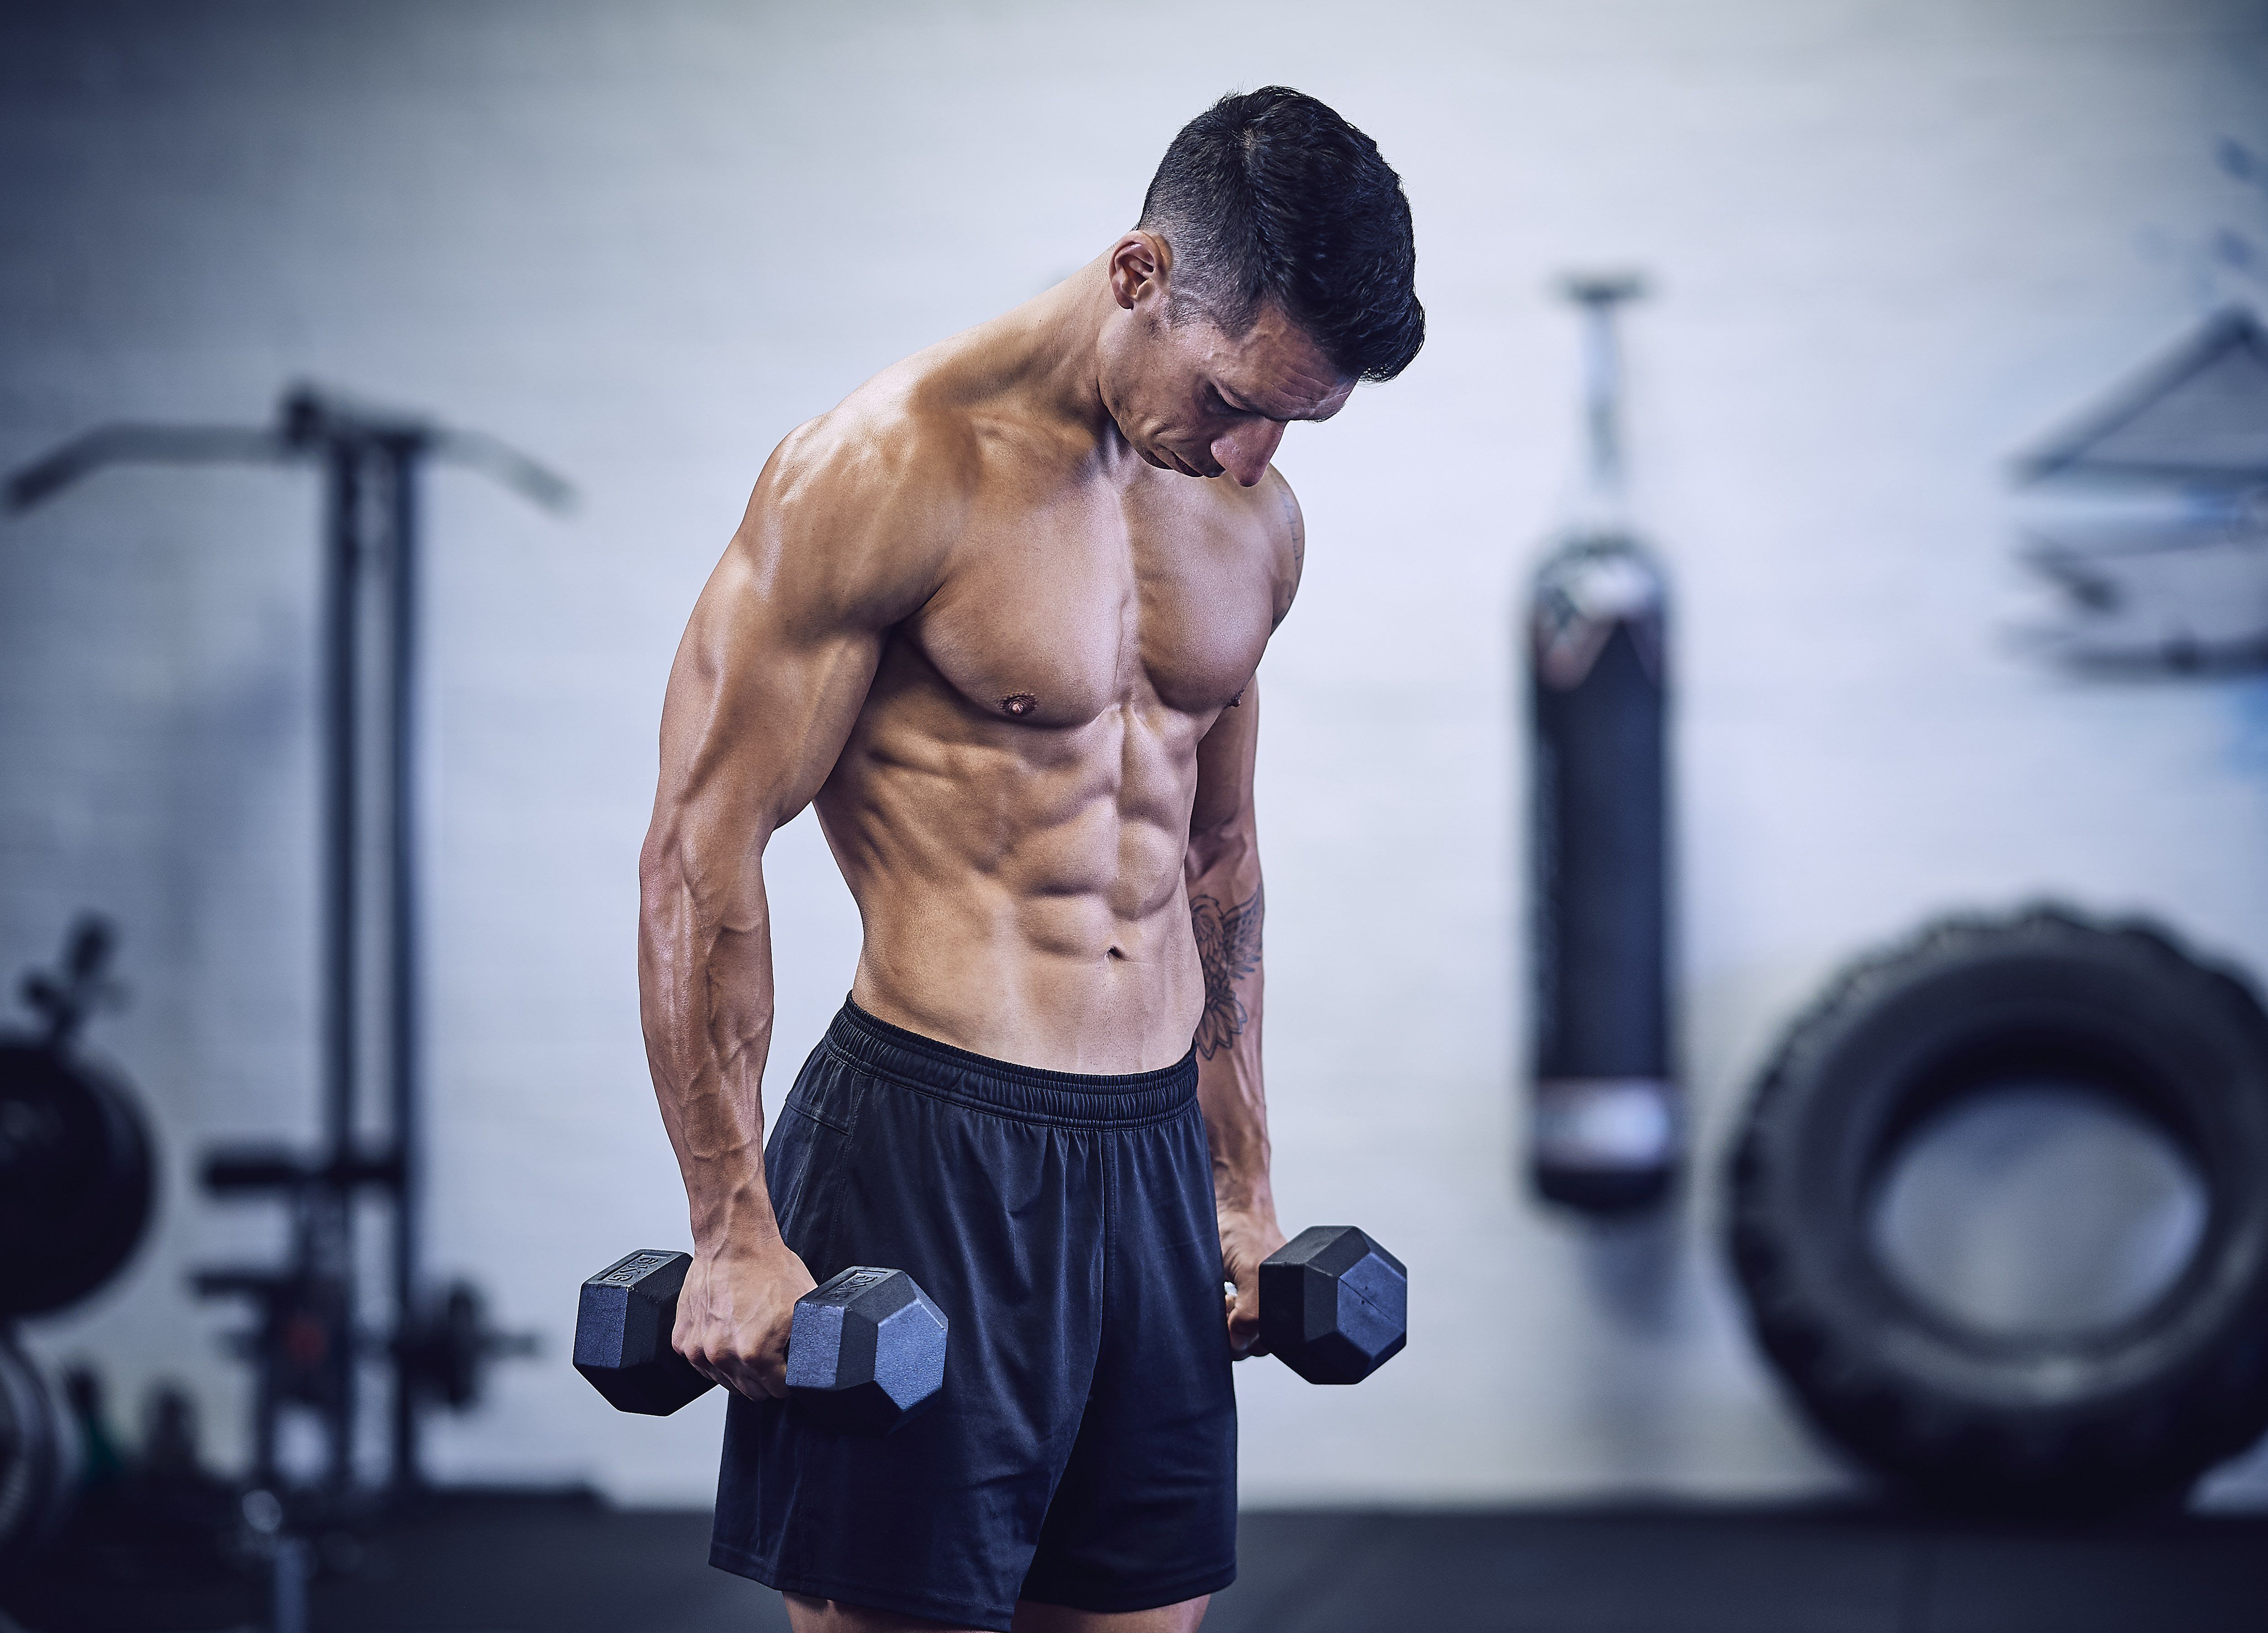 Build Size And Strength With Alternating Rest-Pause